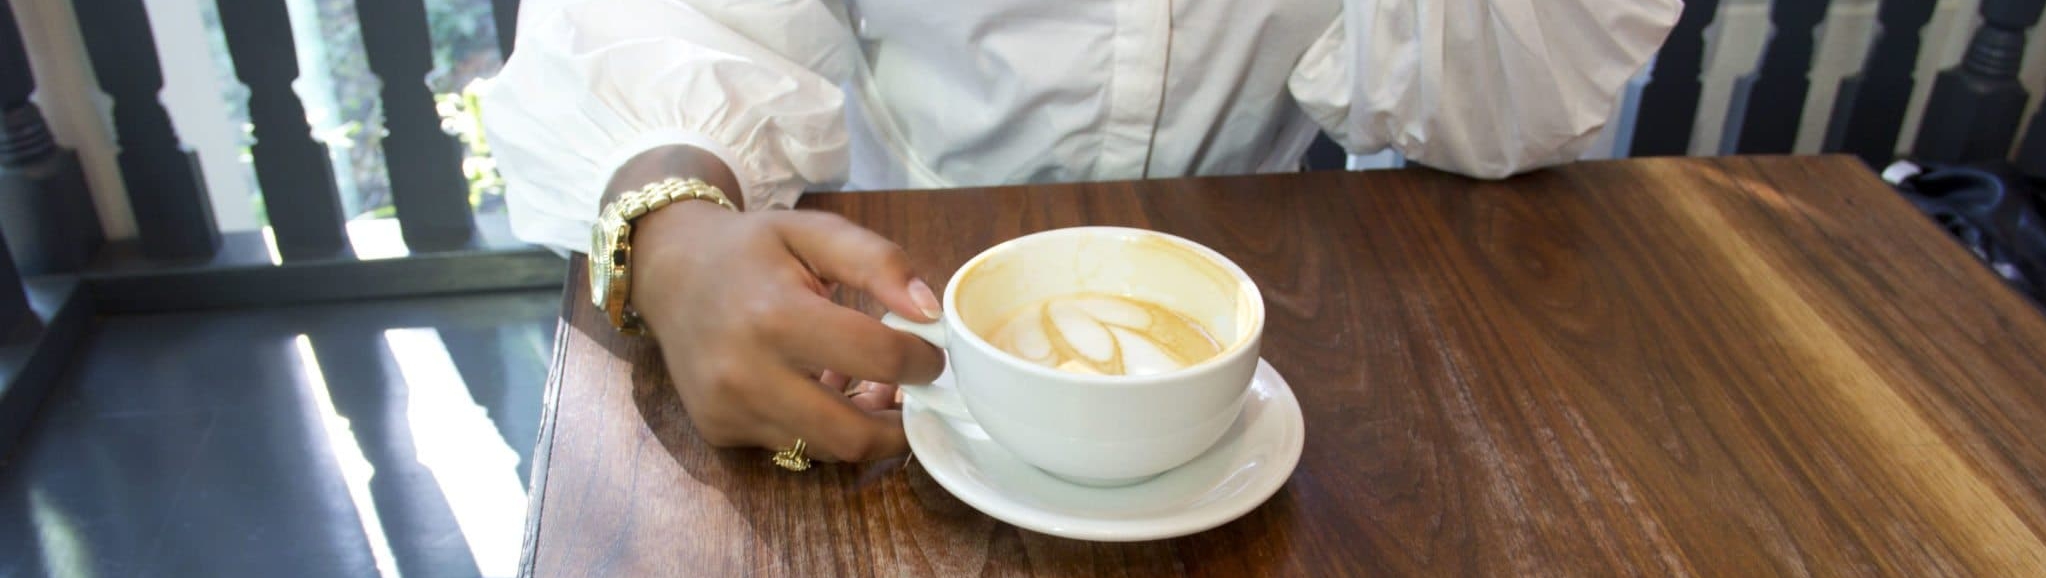 Photo (cropped) of a person sitting across the table, holding a latte. Photo credit: @marceau_photeau from nappy.co, license CC0 - thank you!"